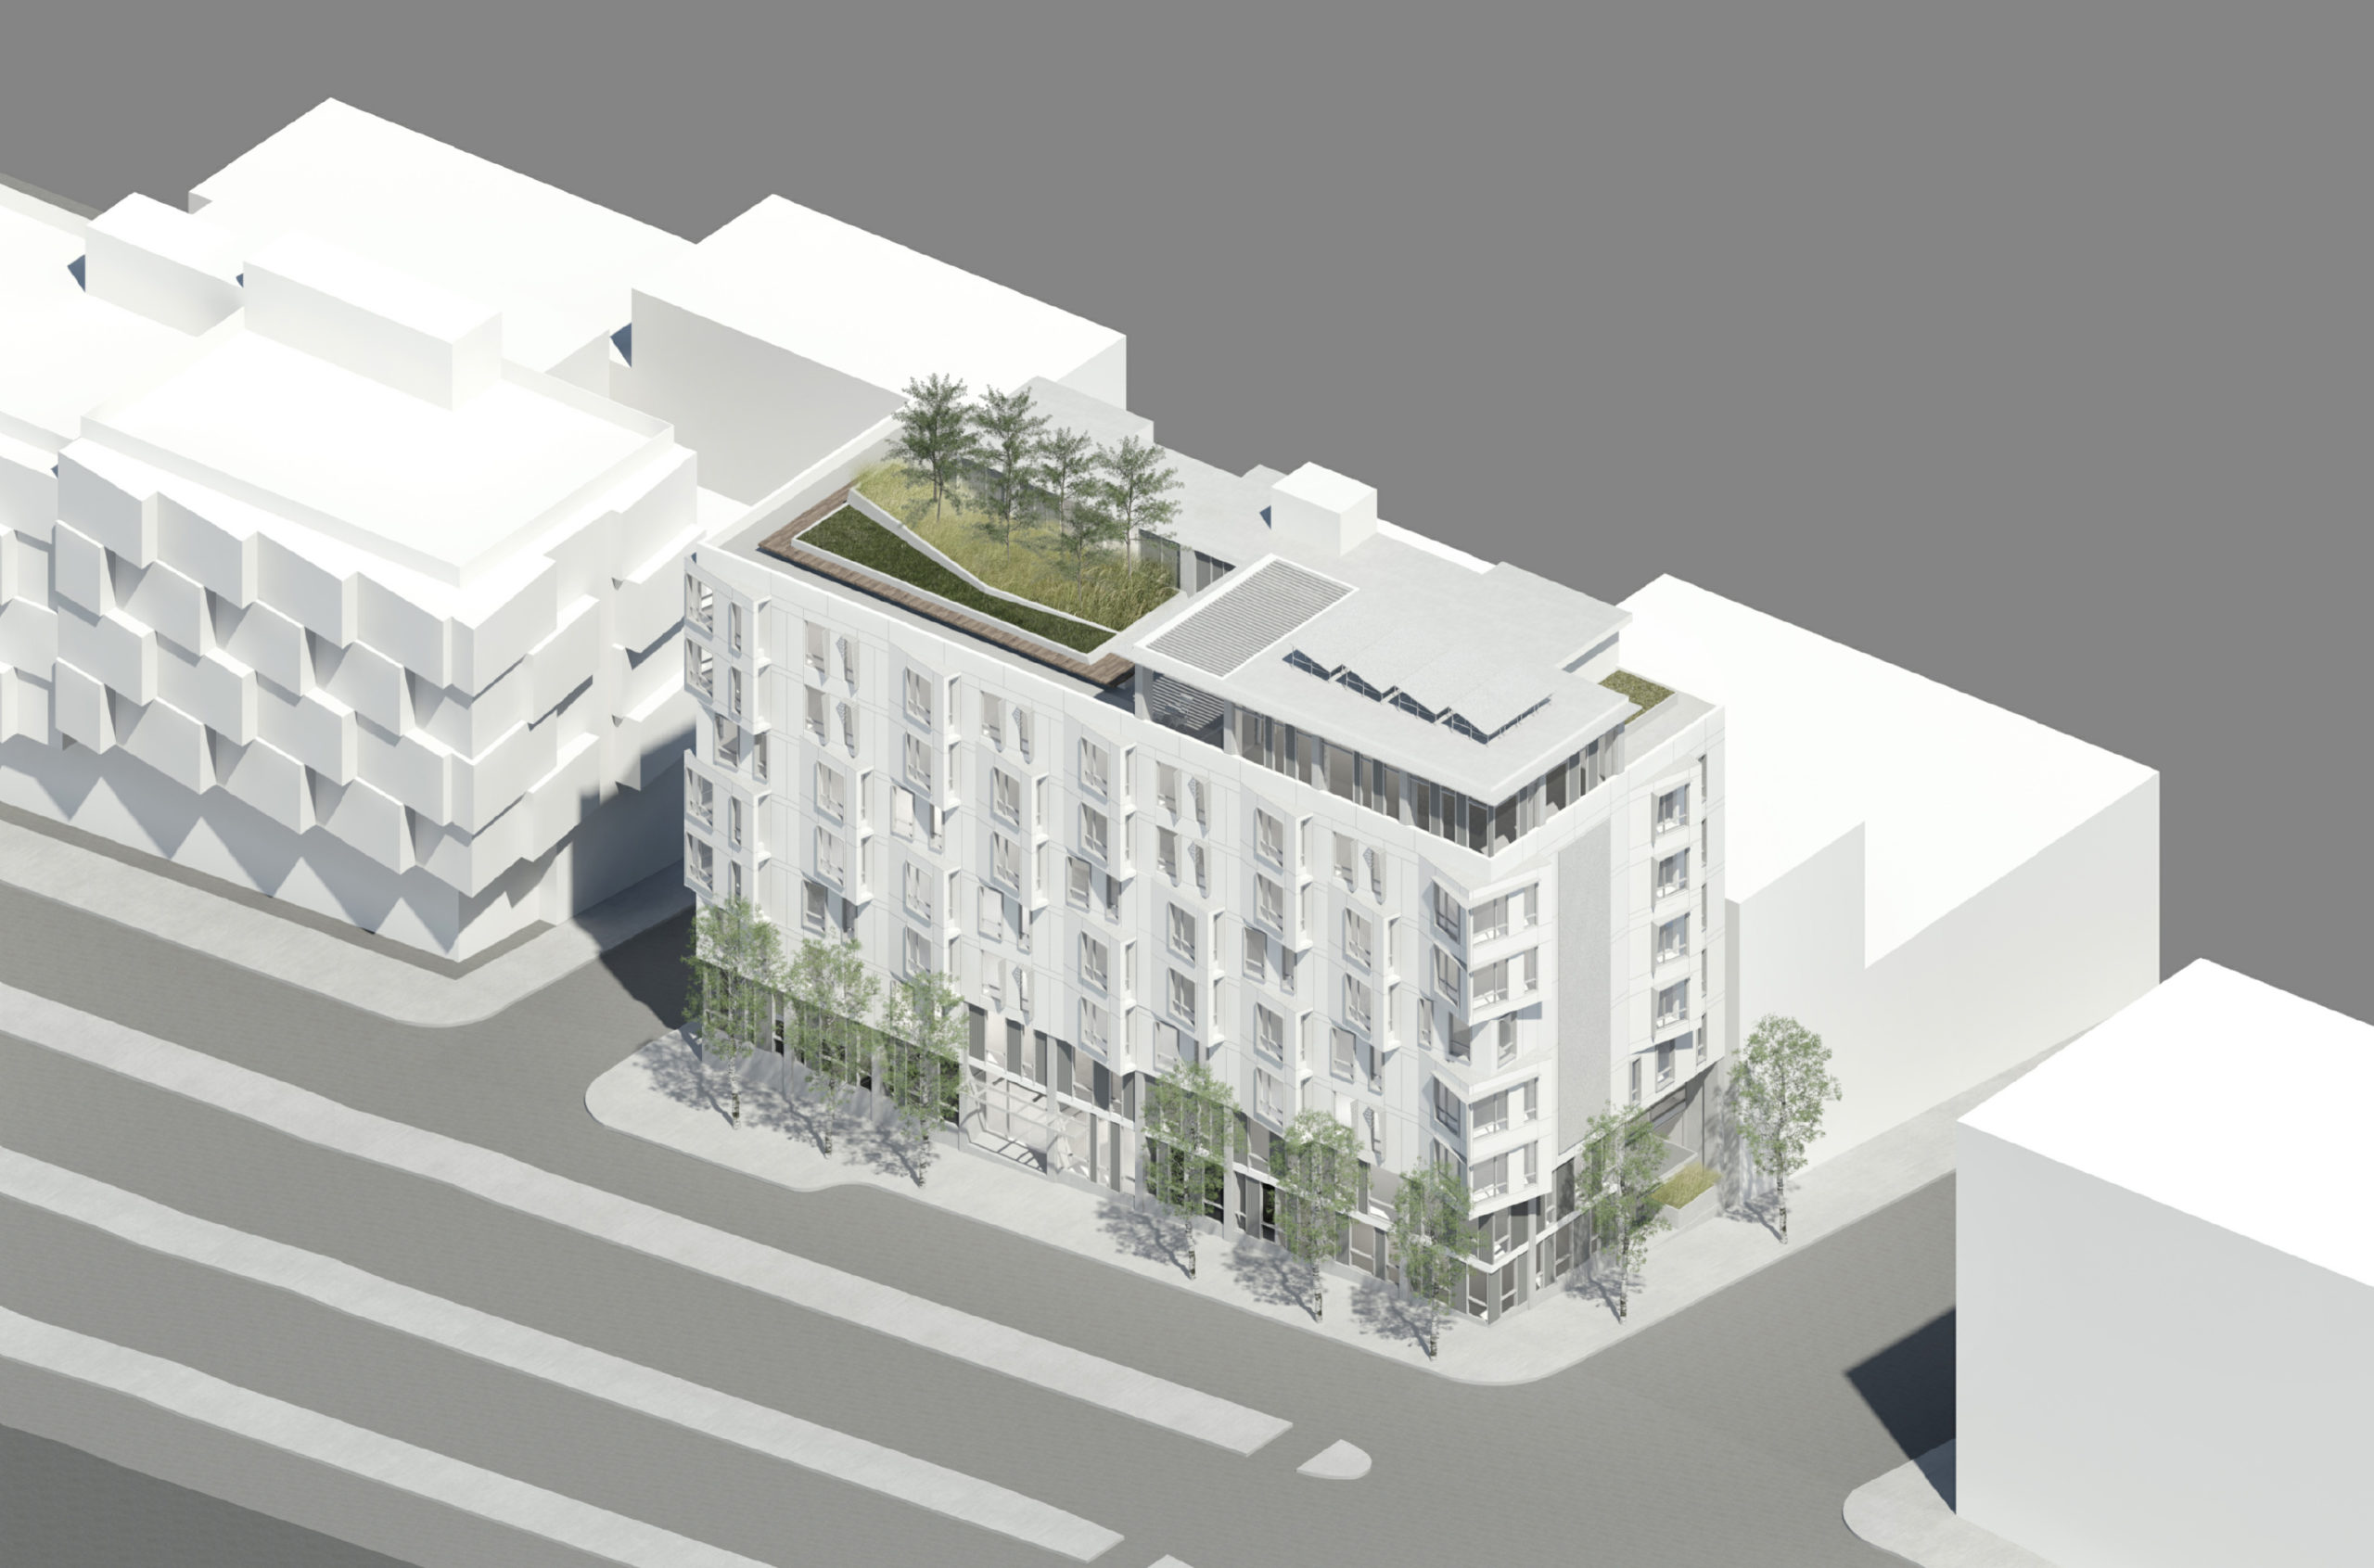 78 Haight Street axon aerial view, rendering by Paulett Taggart Architects